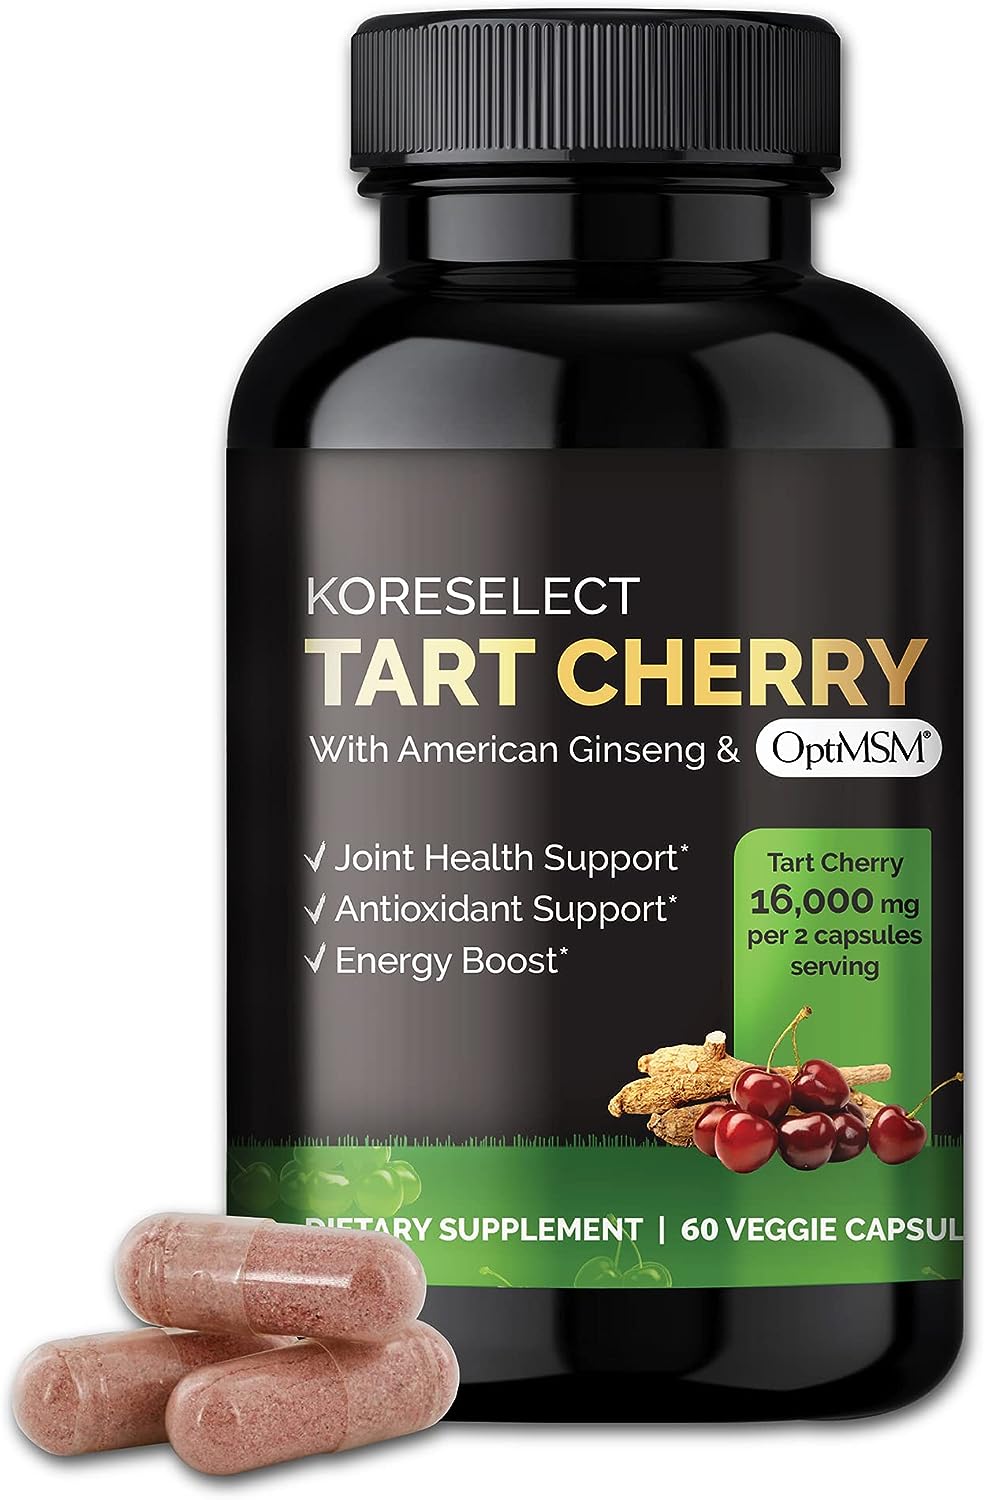 Tart Cherry Extract Capsules 16,000mg, MSM Joint Support Supplement for Men & Women with American Ginseng, Antioxidant Strength Joints Mobility & Comfort Strength - 60 Vegan Capsules